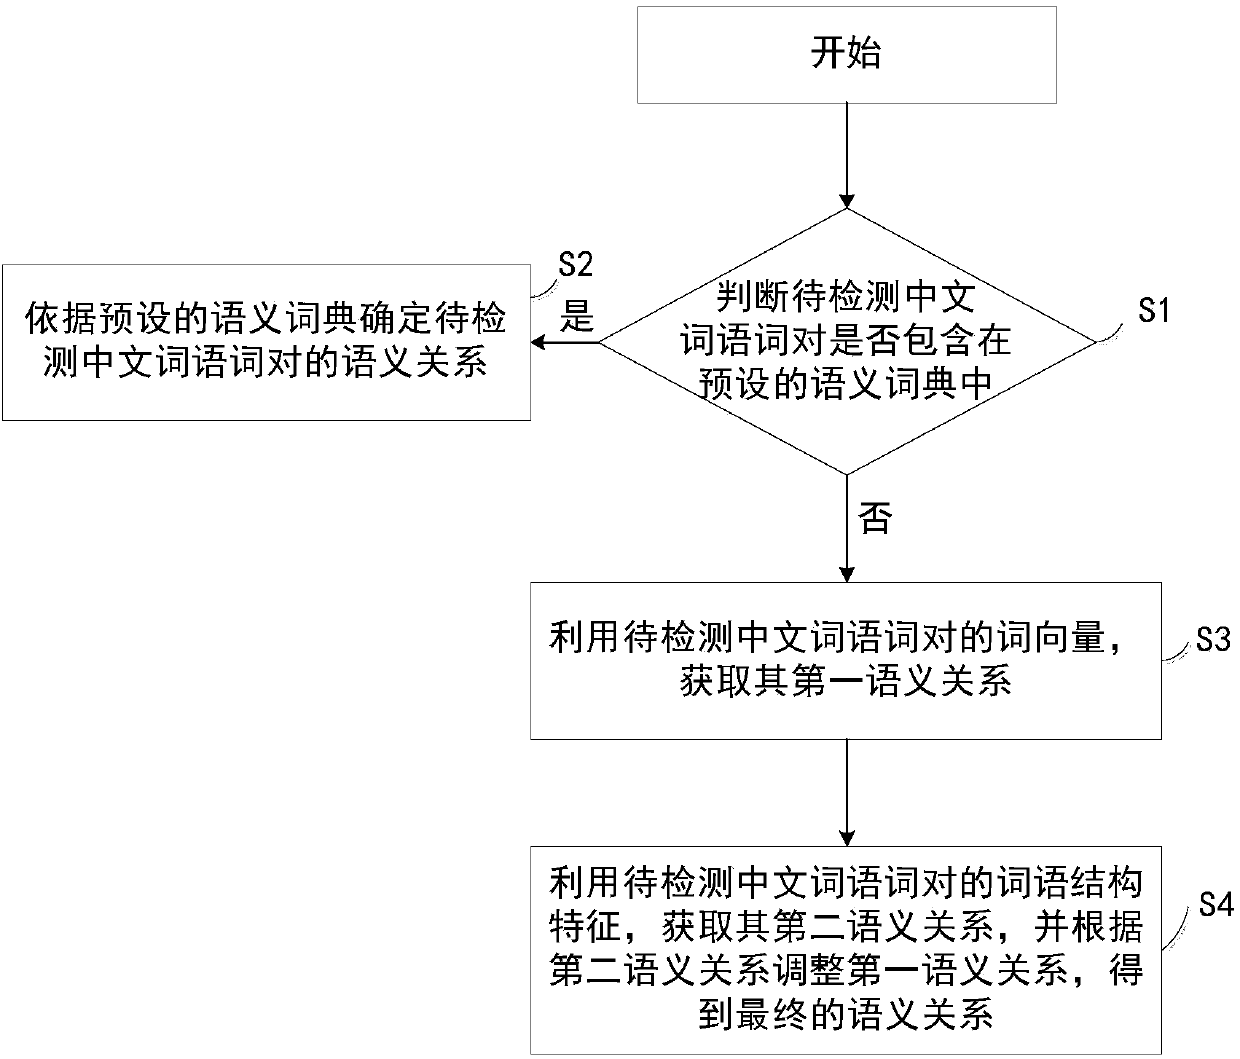 Chinese semantic relation recognition method and device